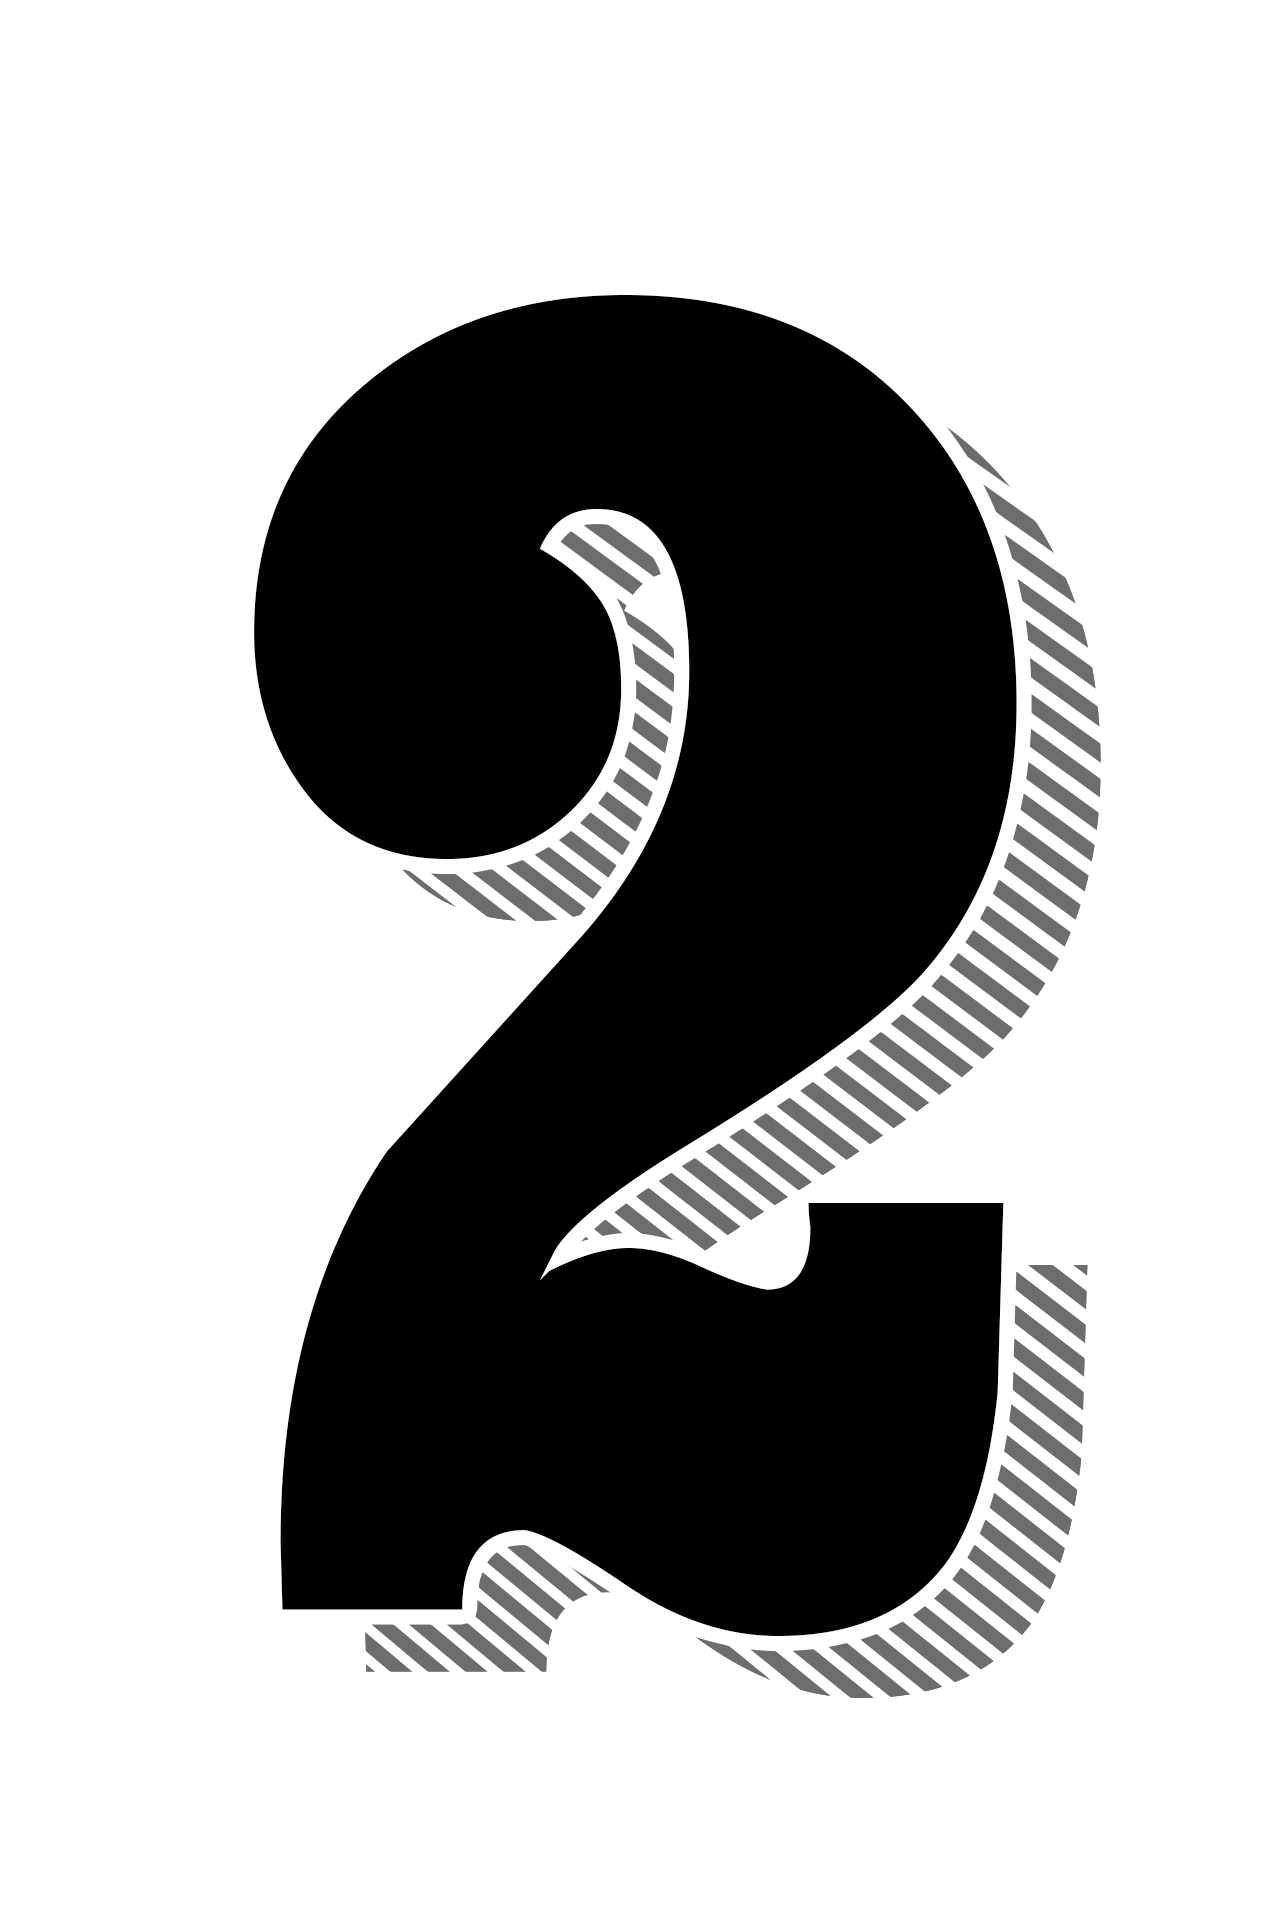 Numbers two 2 drawing free image download